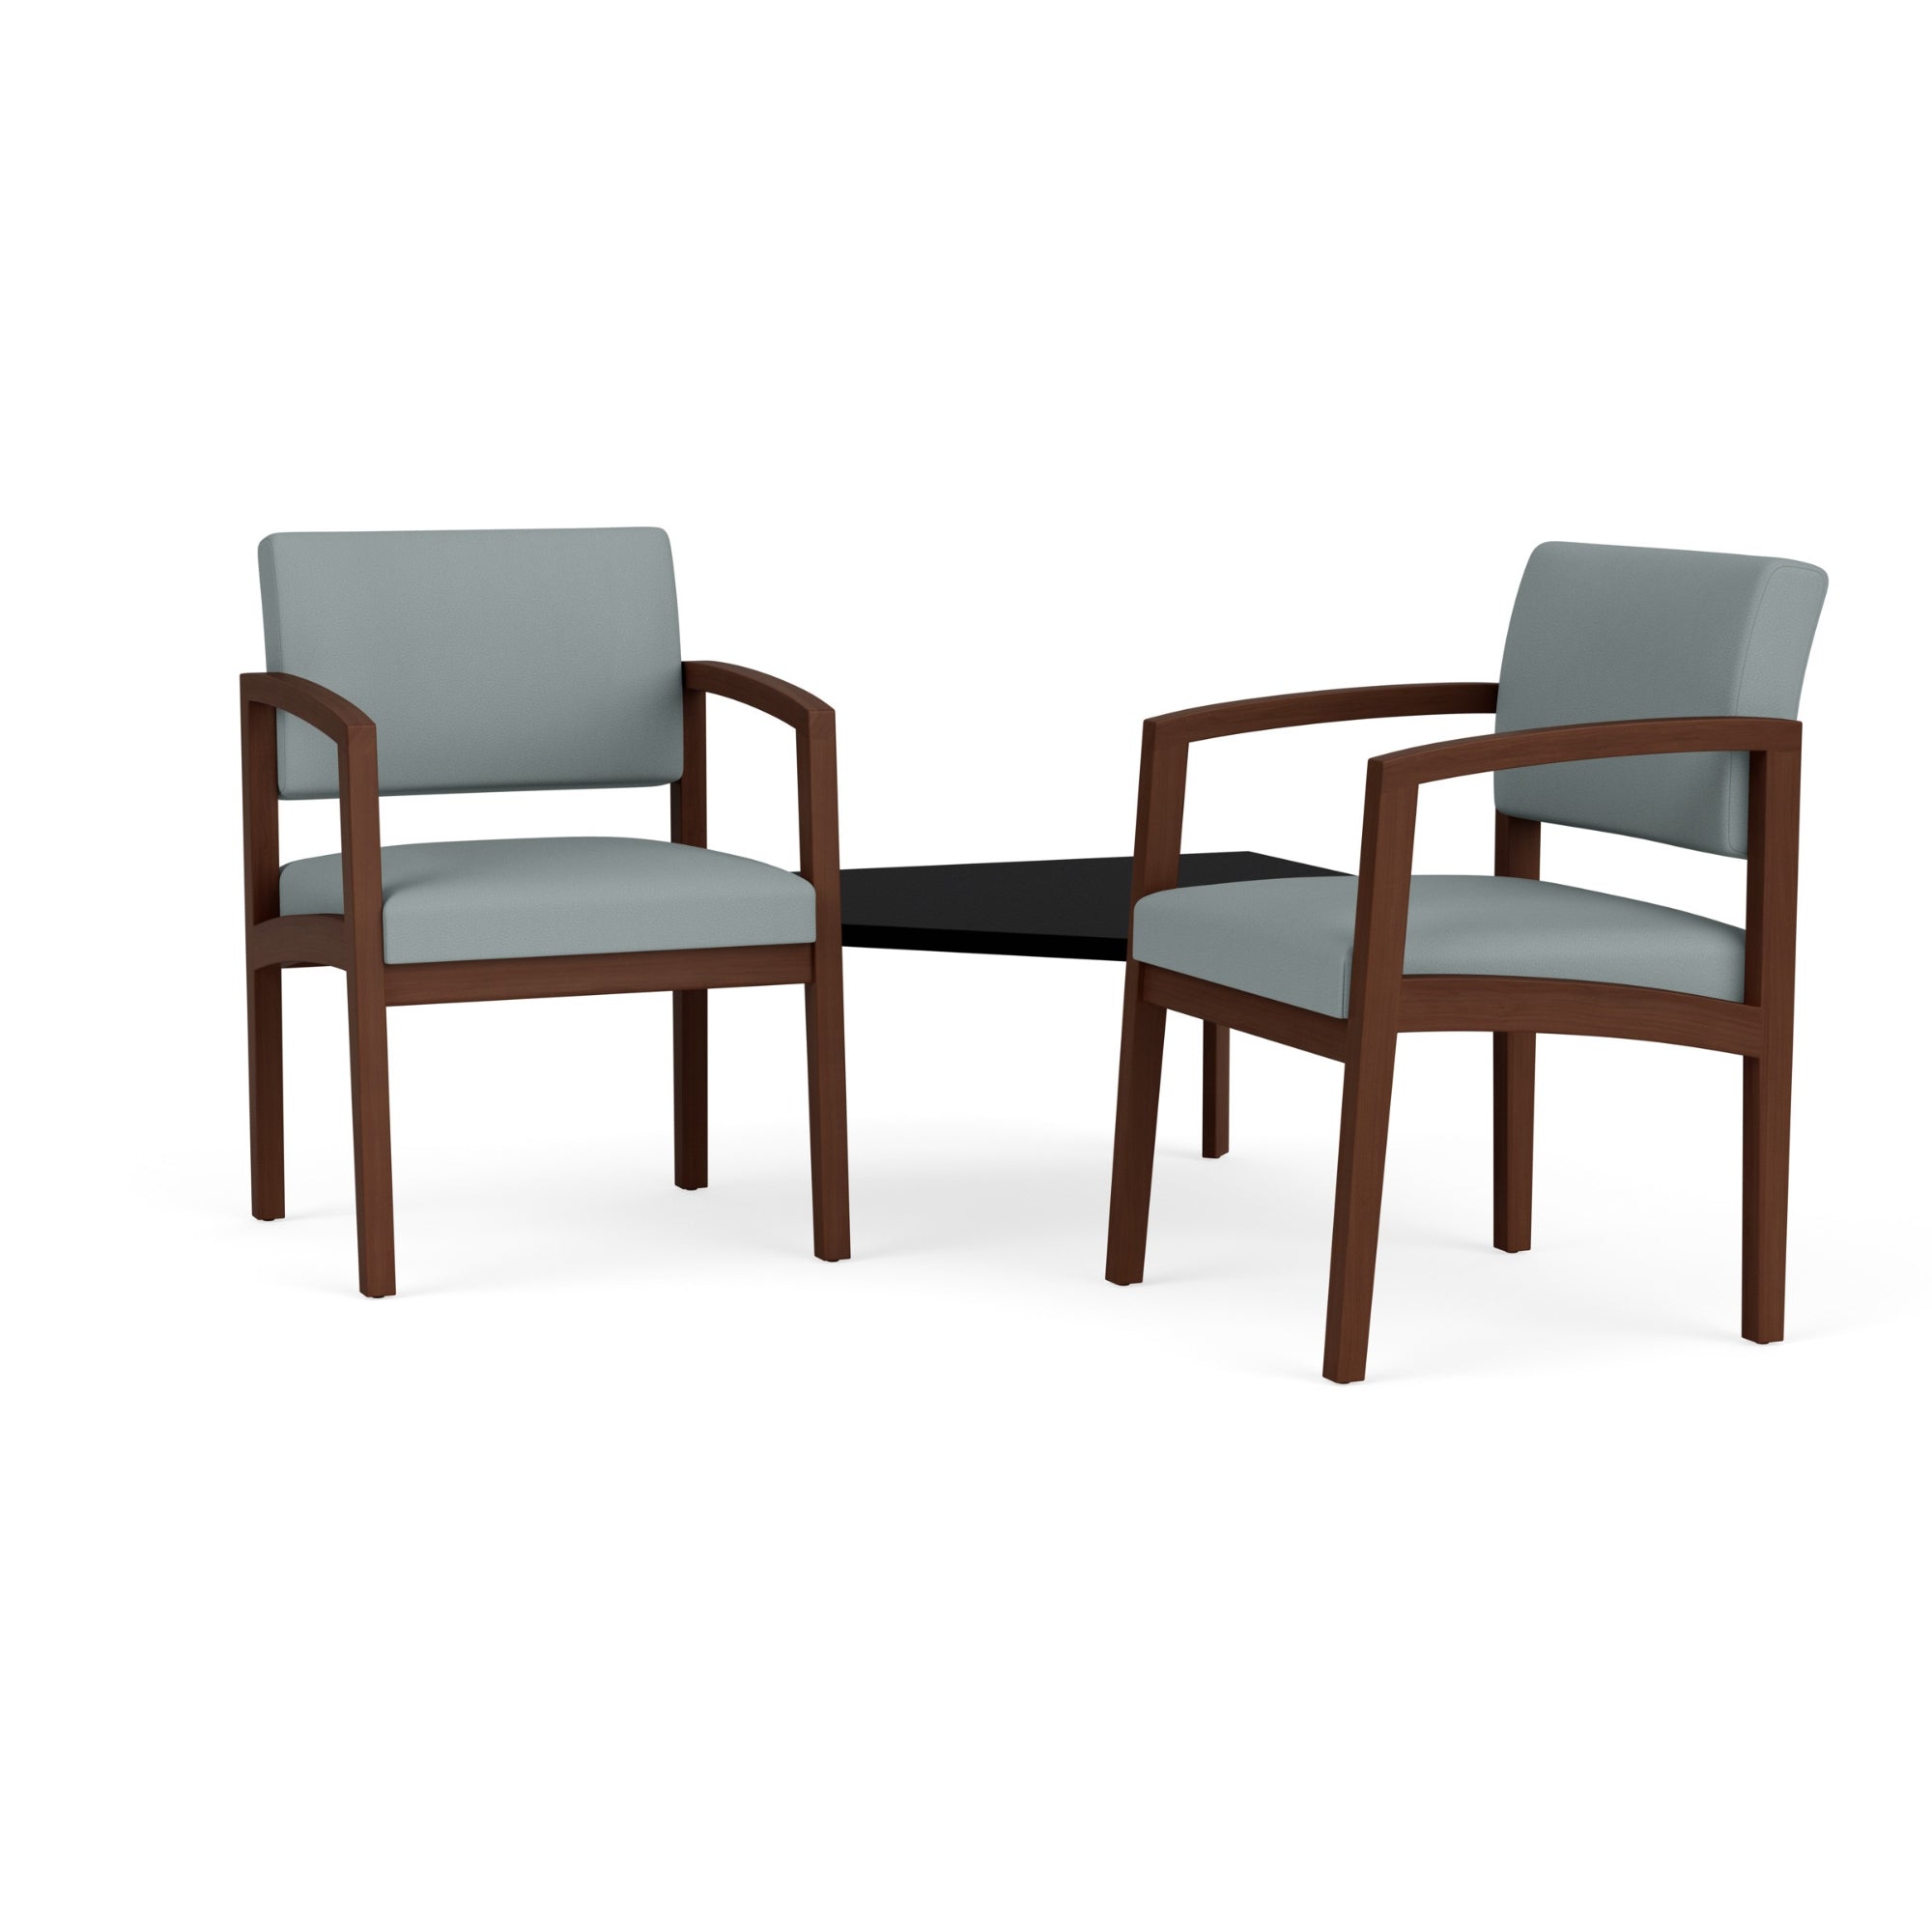 Lenox Wood Collection Reception Seating, 2 Chairs with Black Laminate Connecting Corner Table, Healthcare Vinyl Upholstery, FREE SHIPPING